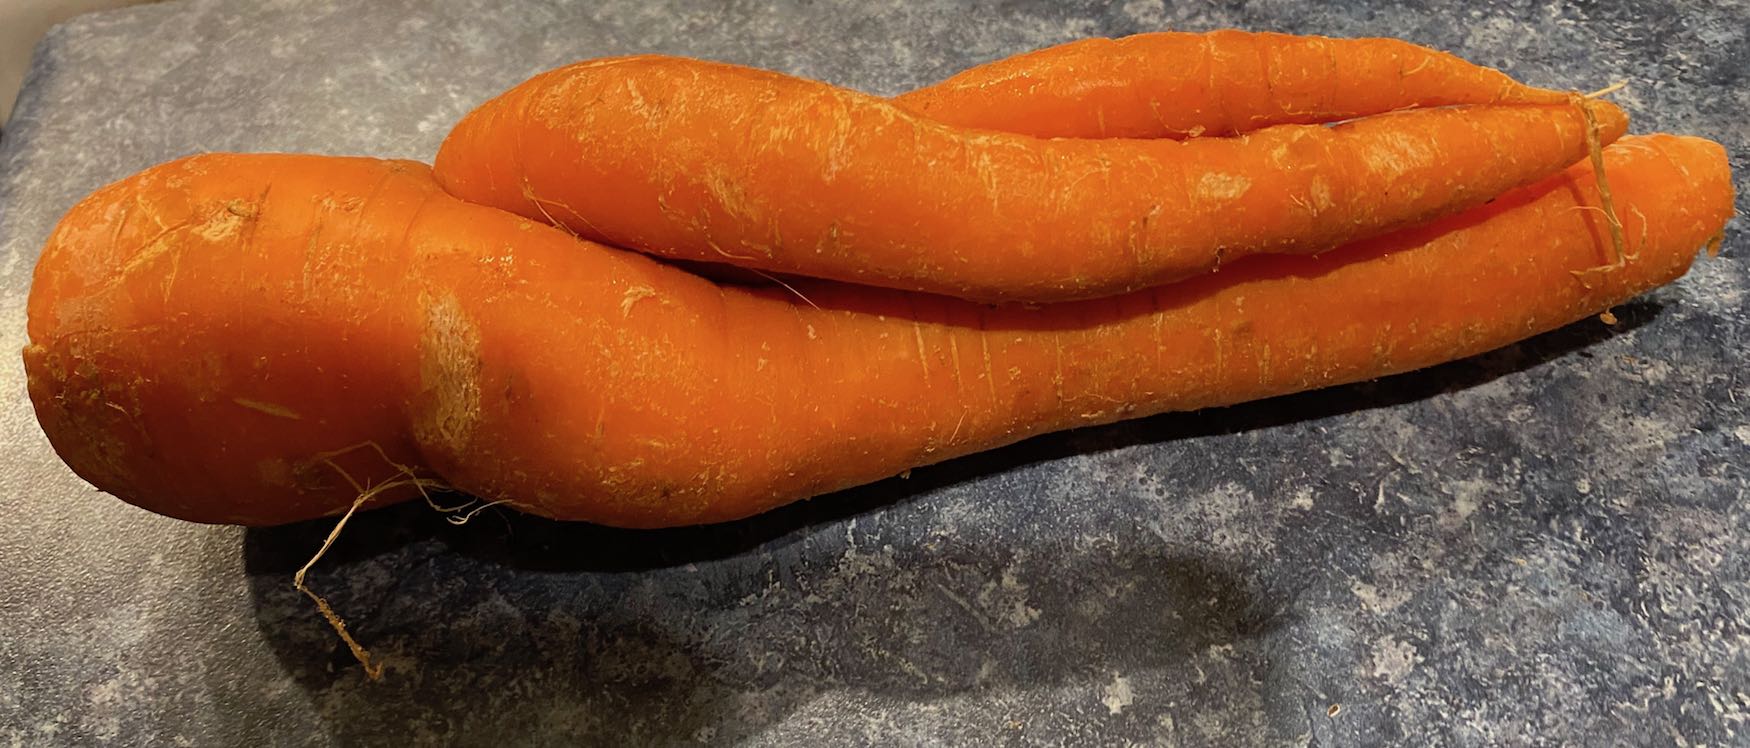 It's the weekend! Number 231, An Oddly Shaped Carrot from the Grocery Store